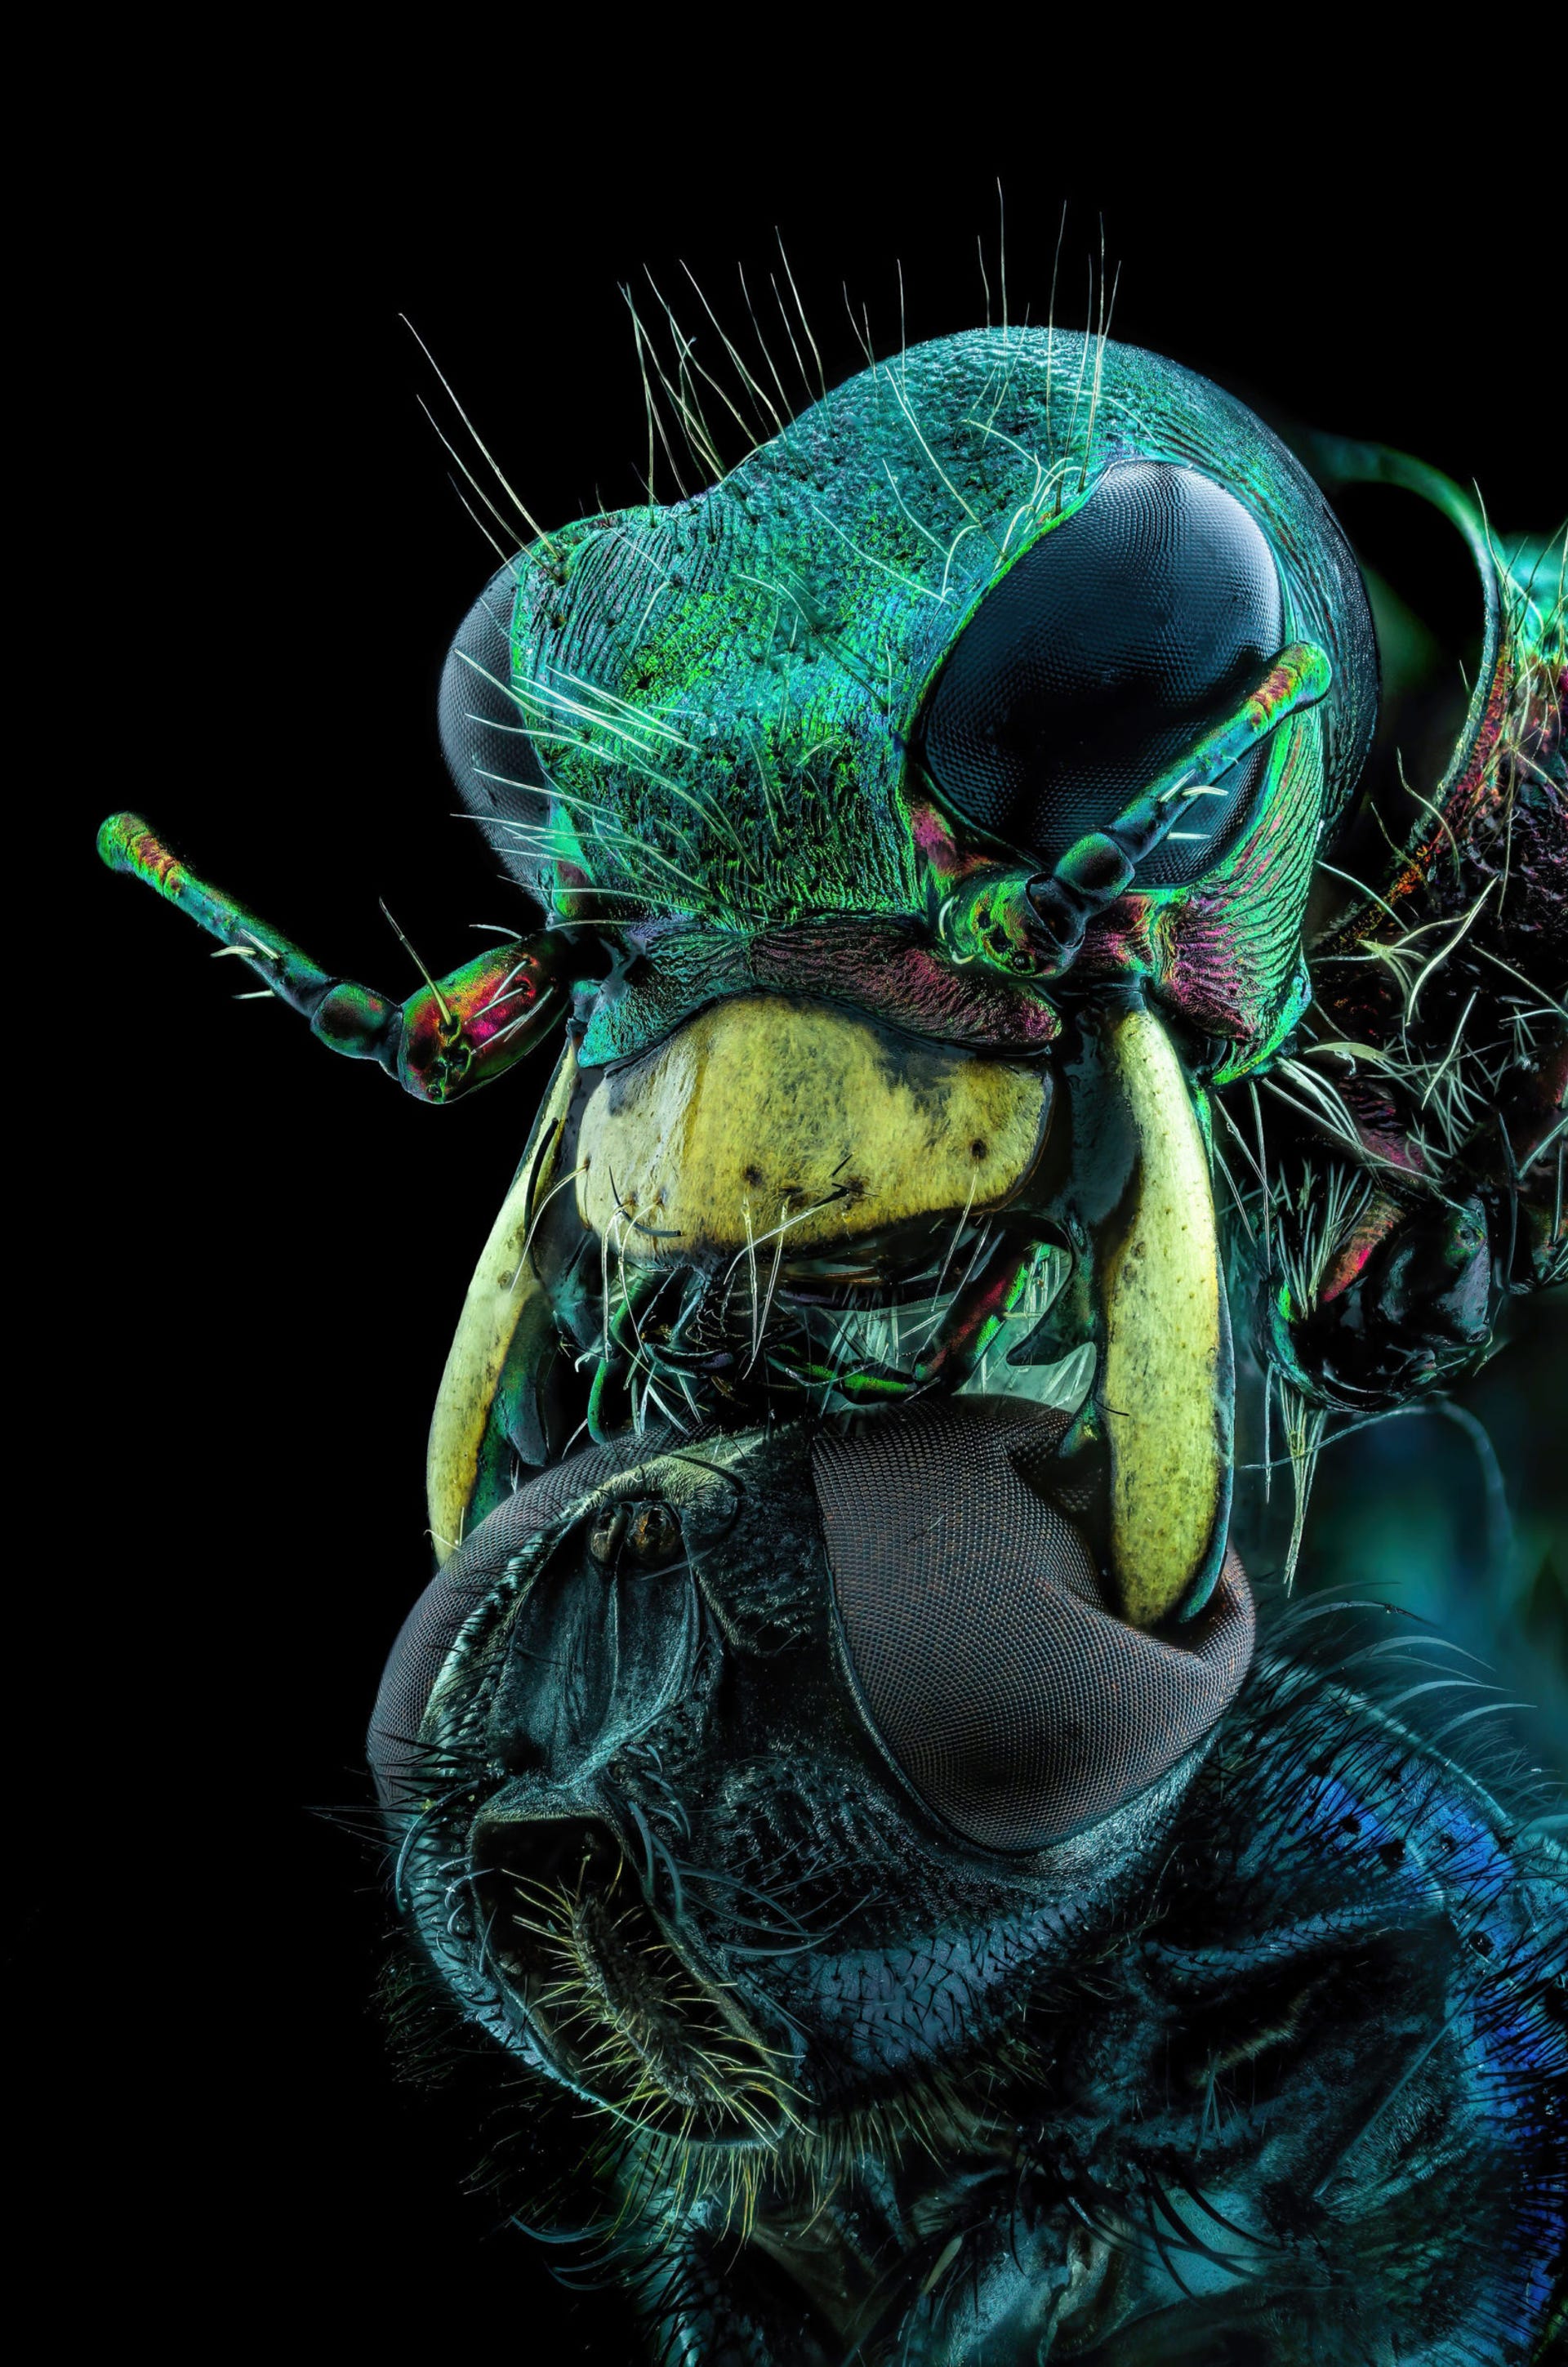 Psychedelic shades of blue and green and yellow highlight a view of a beetle's big-eyed head holding onto a fly with the fly's eye squished.